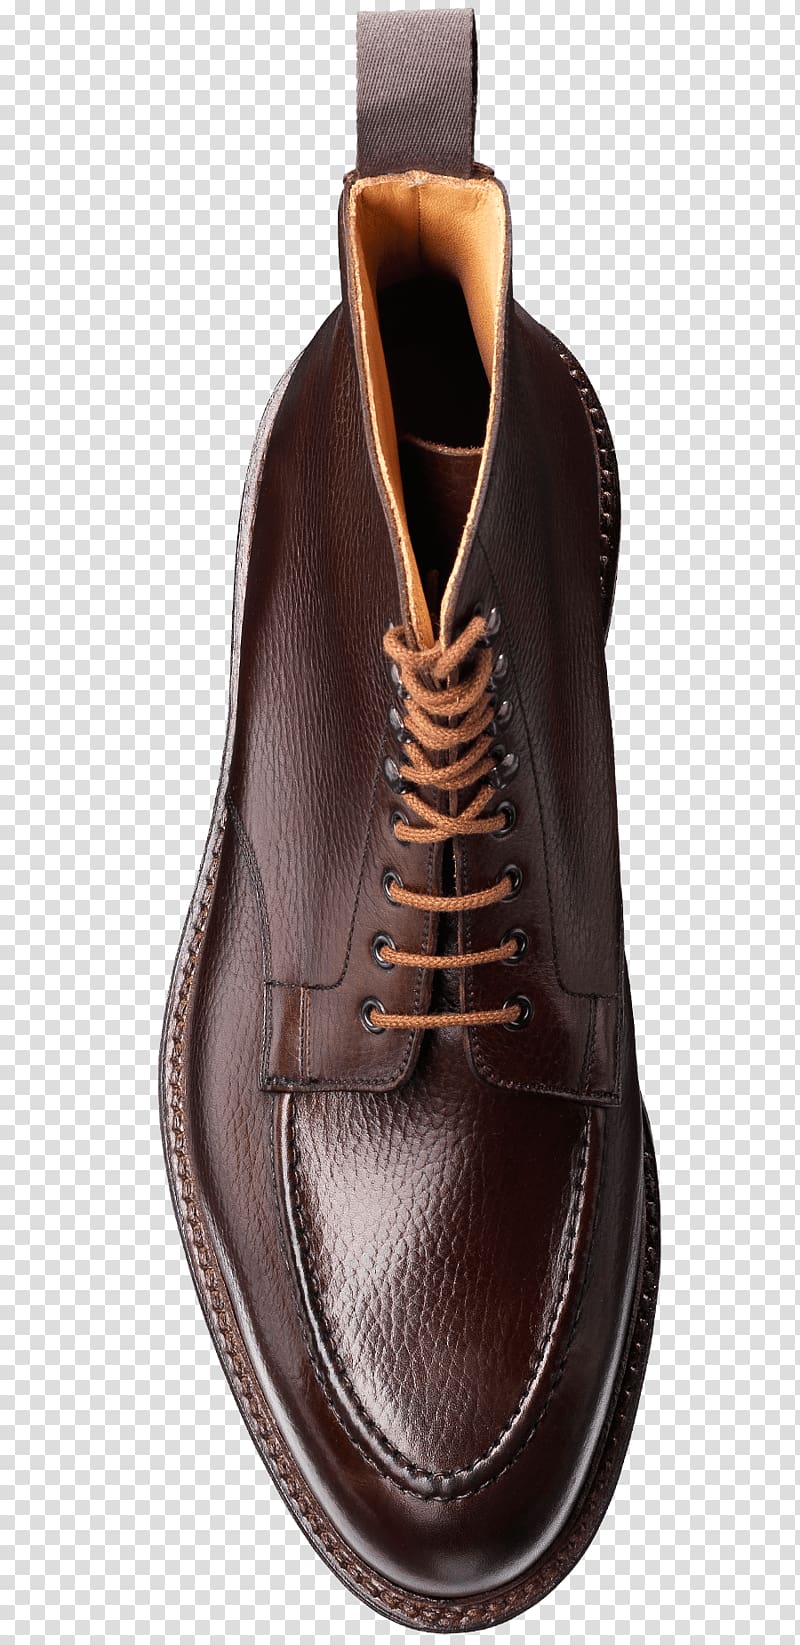 Galway Shoe Boot Leather Calfskin, Goodyear Welt transparent background PNG clipart